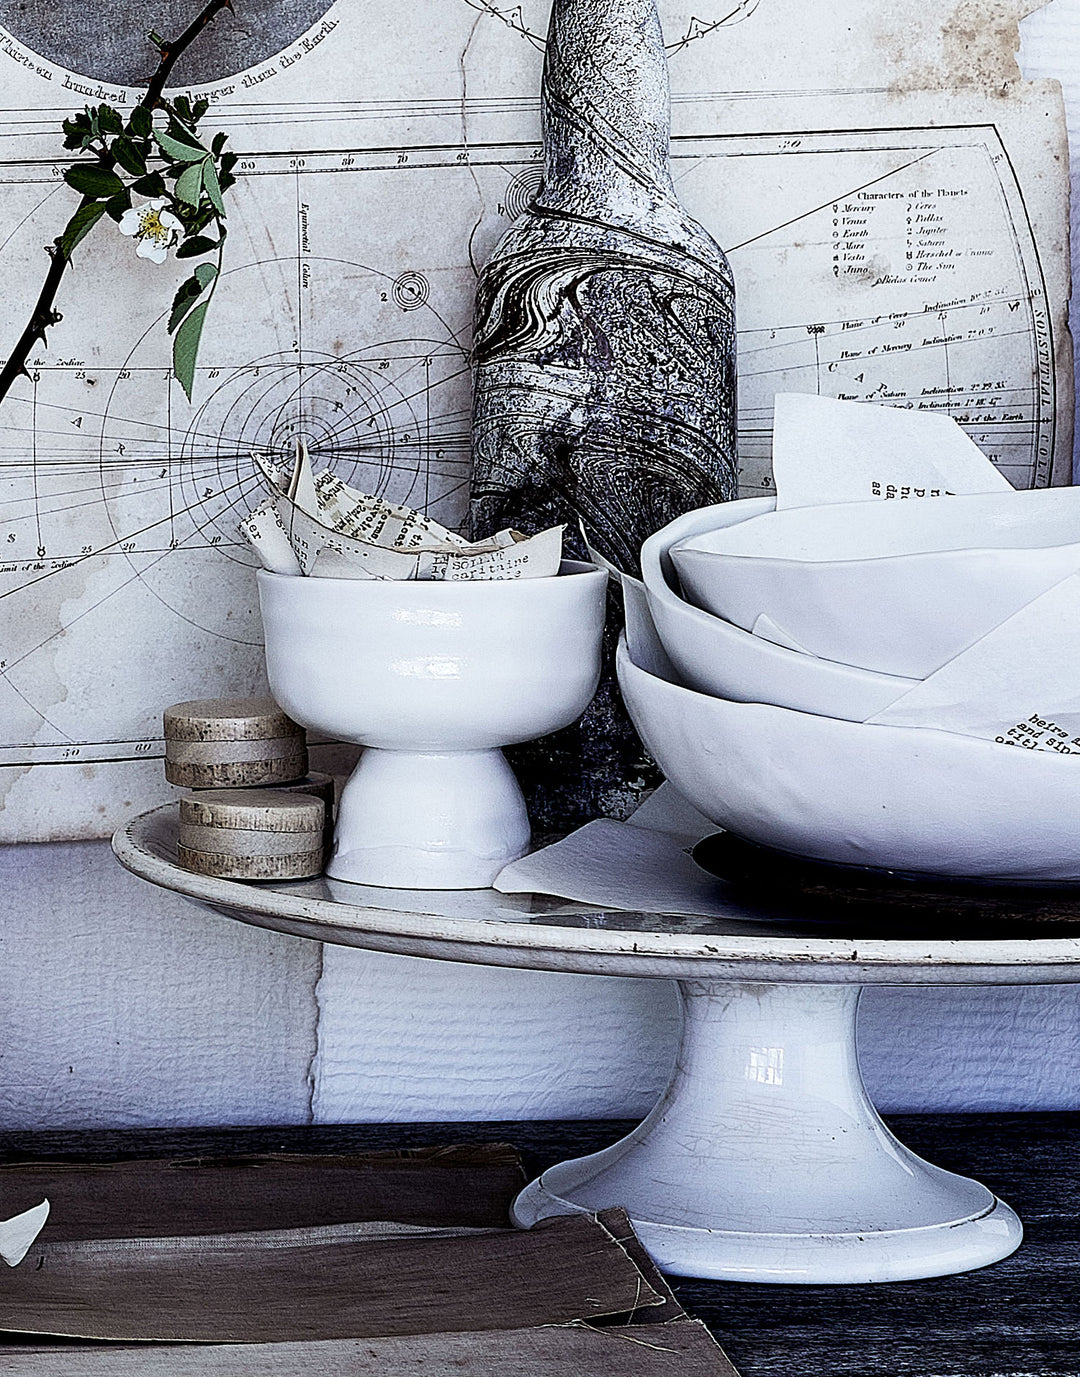 DBO HOME artisan handmade porcelain coupe on cakestand with ceramic bowls and textured vintage map and bottles